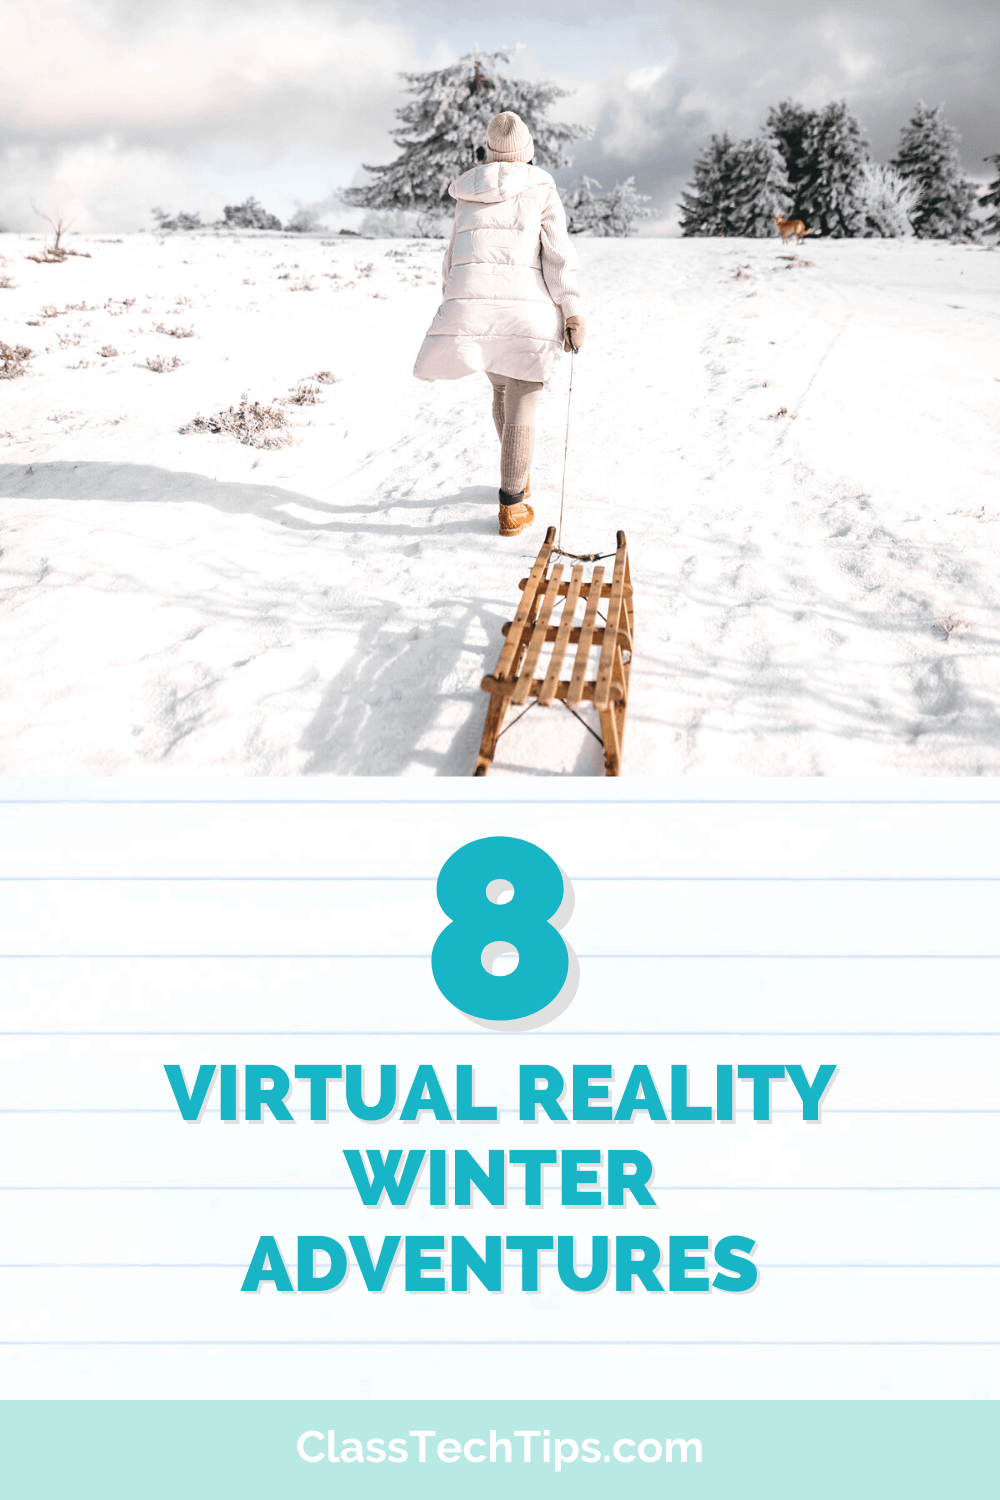 Enthusiastic educator dragging a sled in a snowy field, representing interactive virtual reality education winter learning experiences.